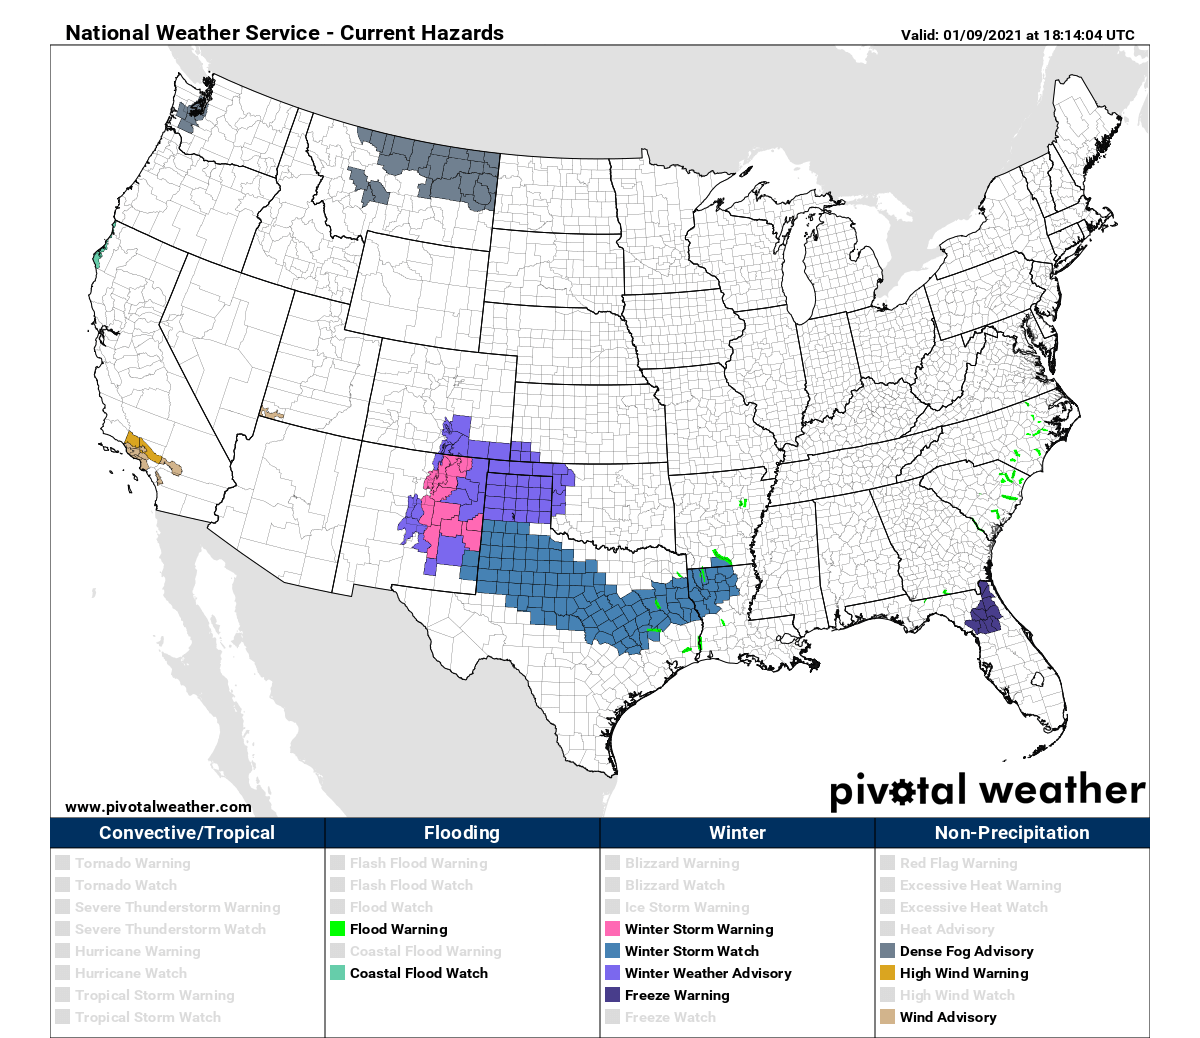 Winter storm watch for Texas as snow is forecast to spread towards the